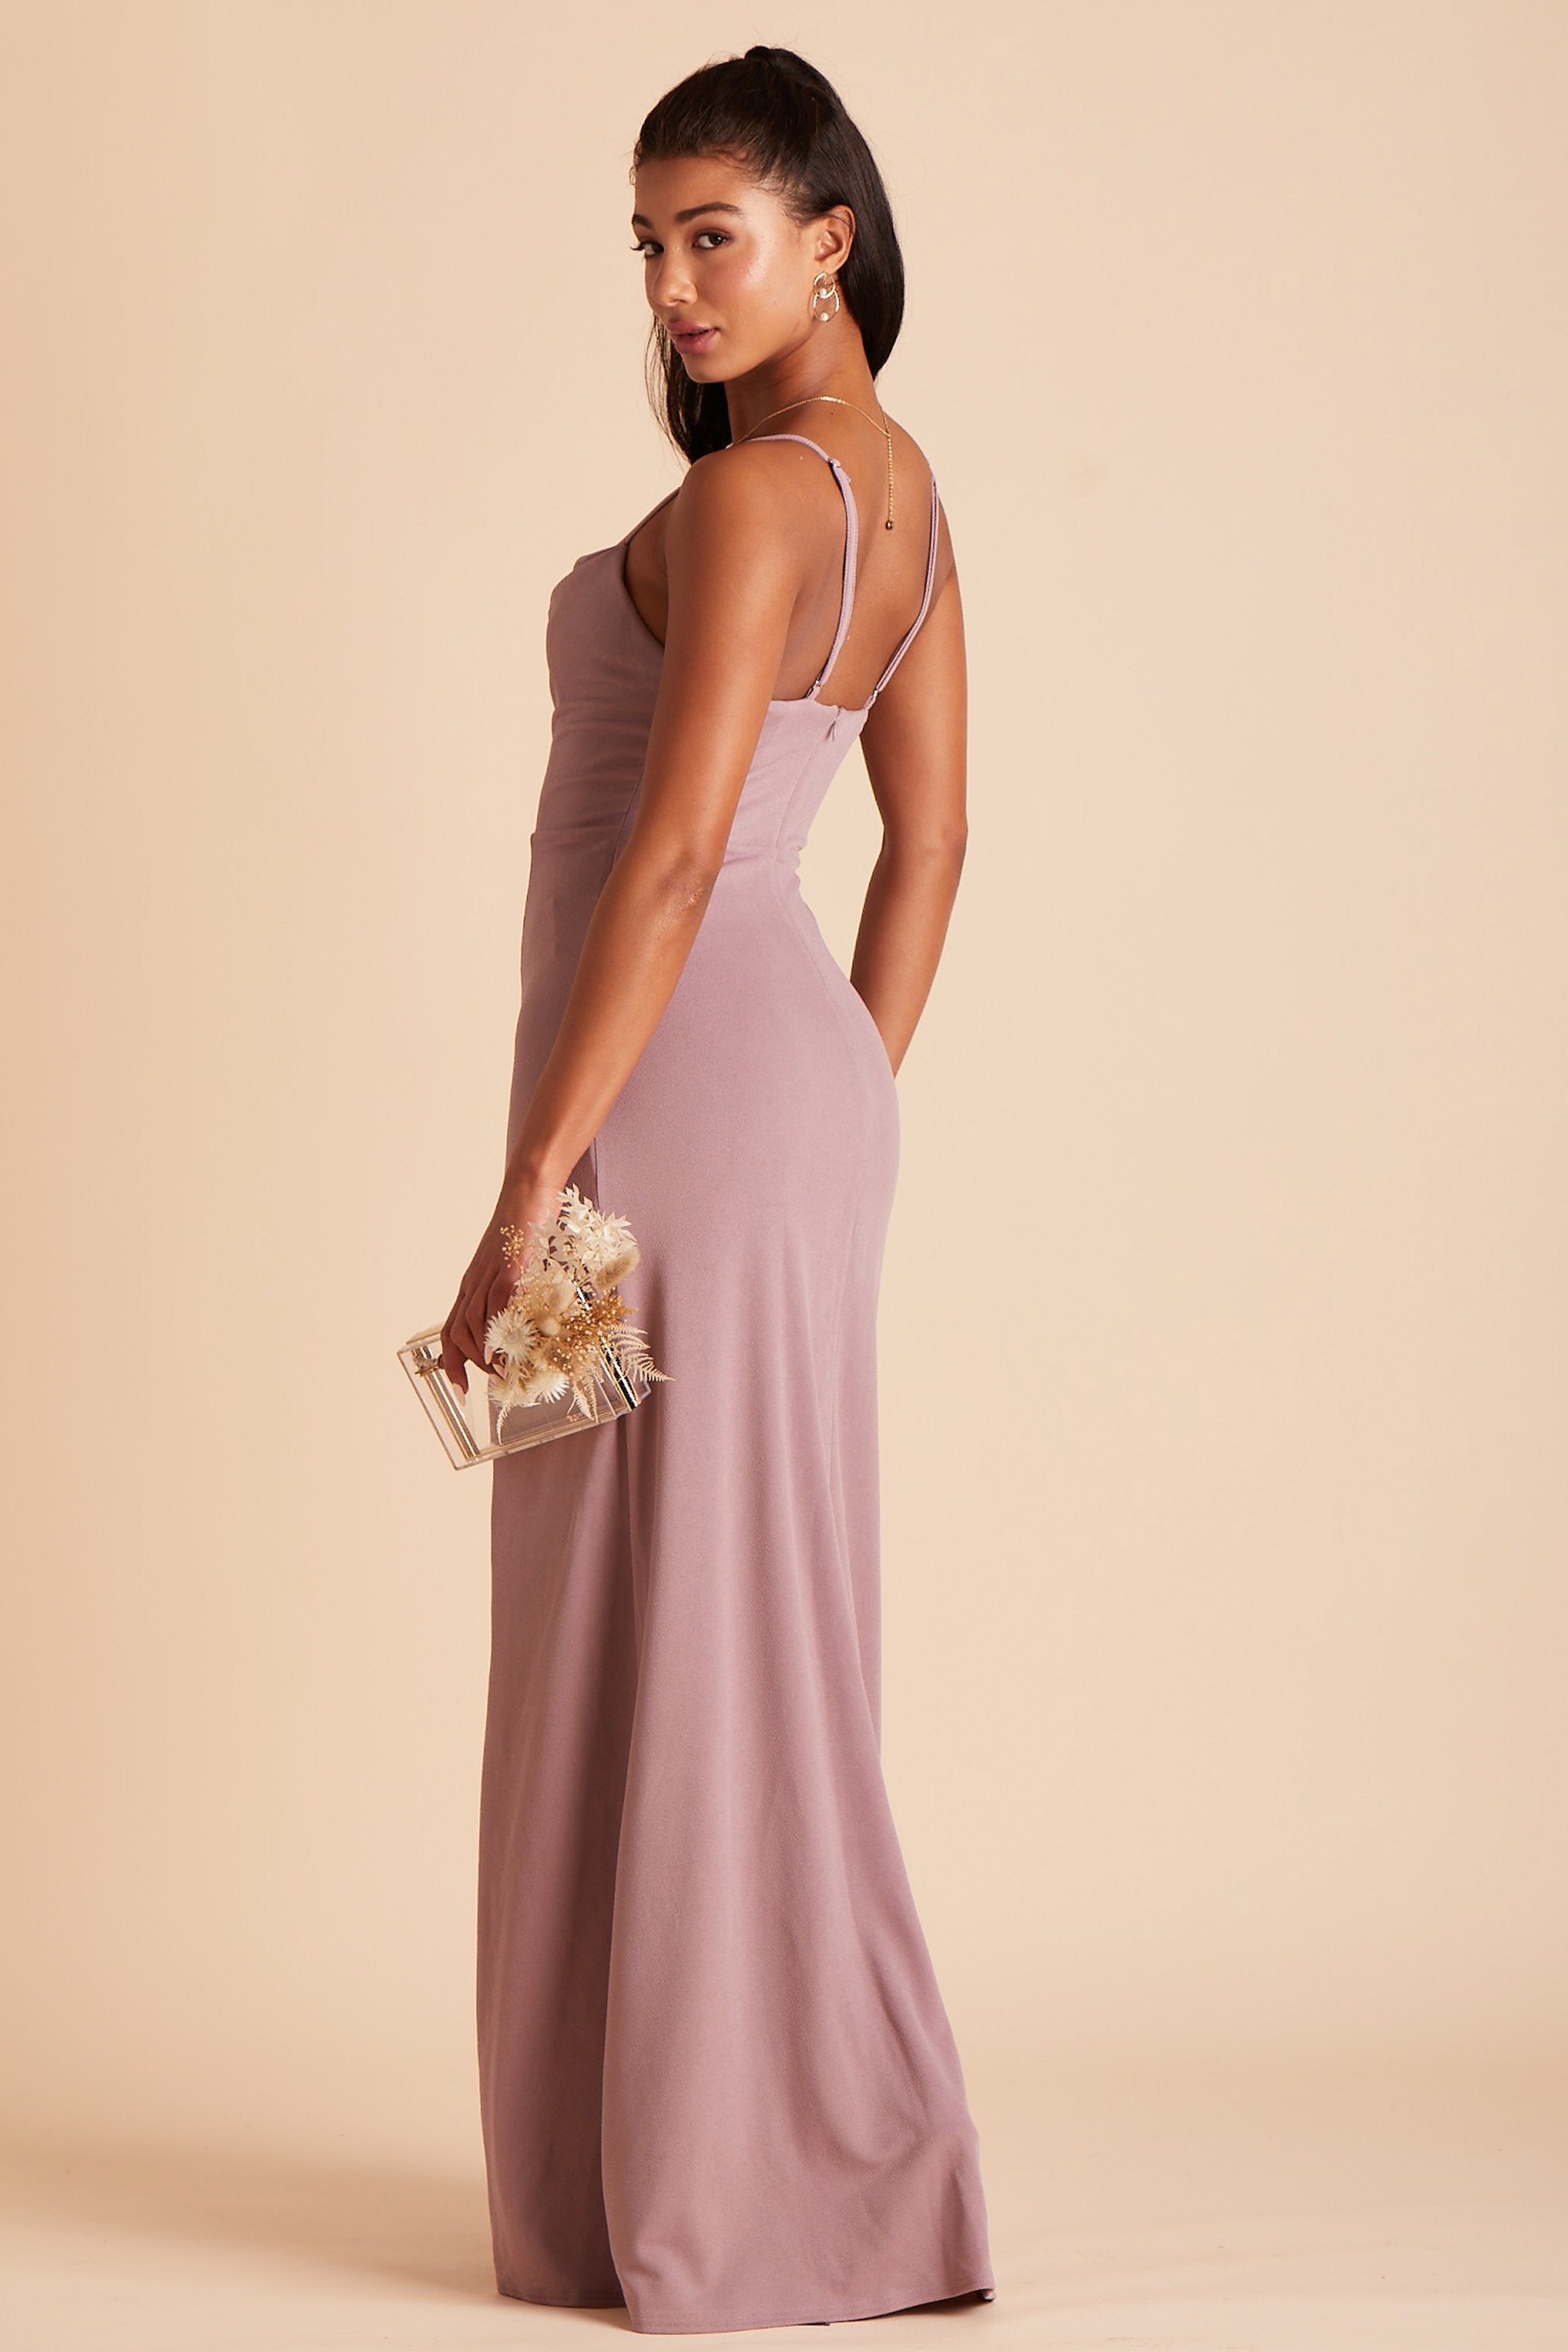 Ash bridesmaid dress in dark mauve crepe by Birdy Grey, side view